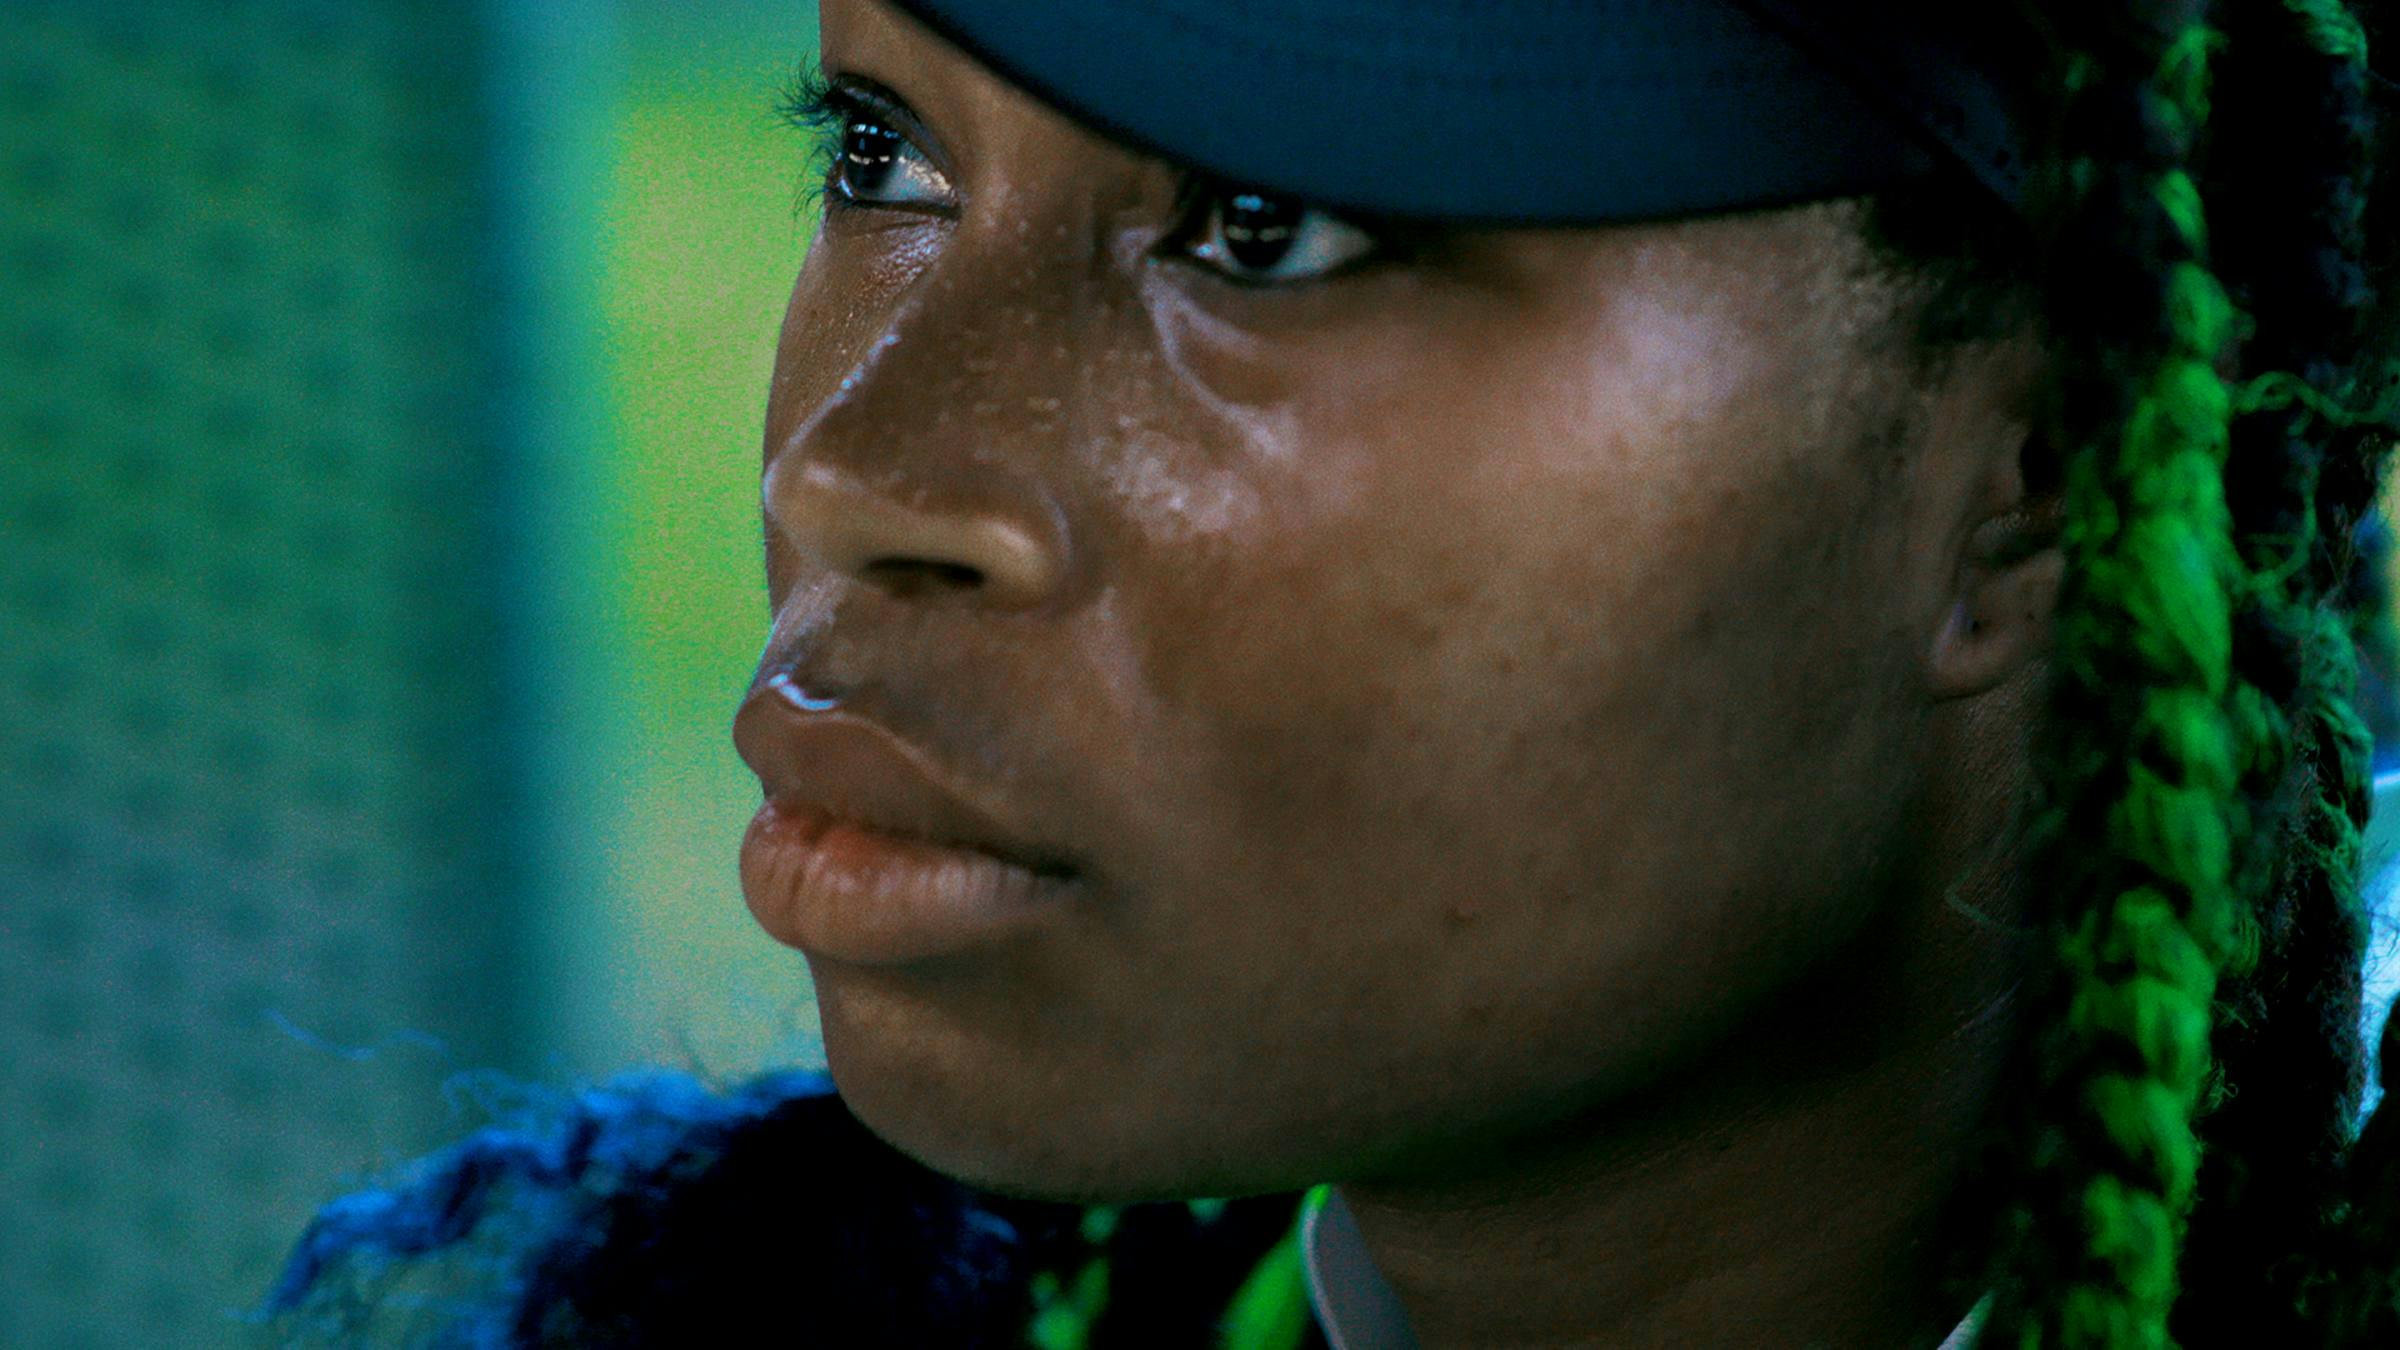 A close up of the artist's face. She has green hair and is wearing a black cap